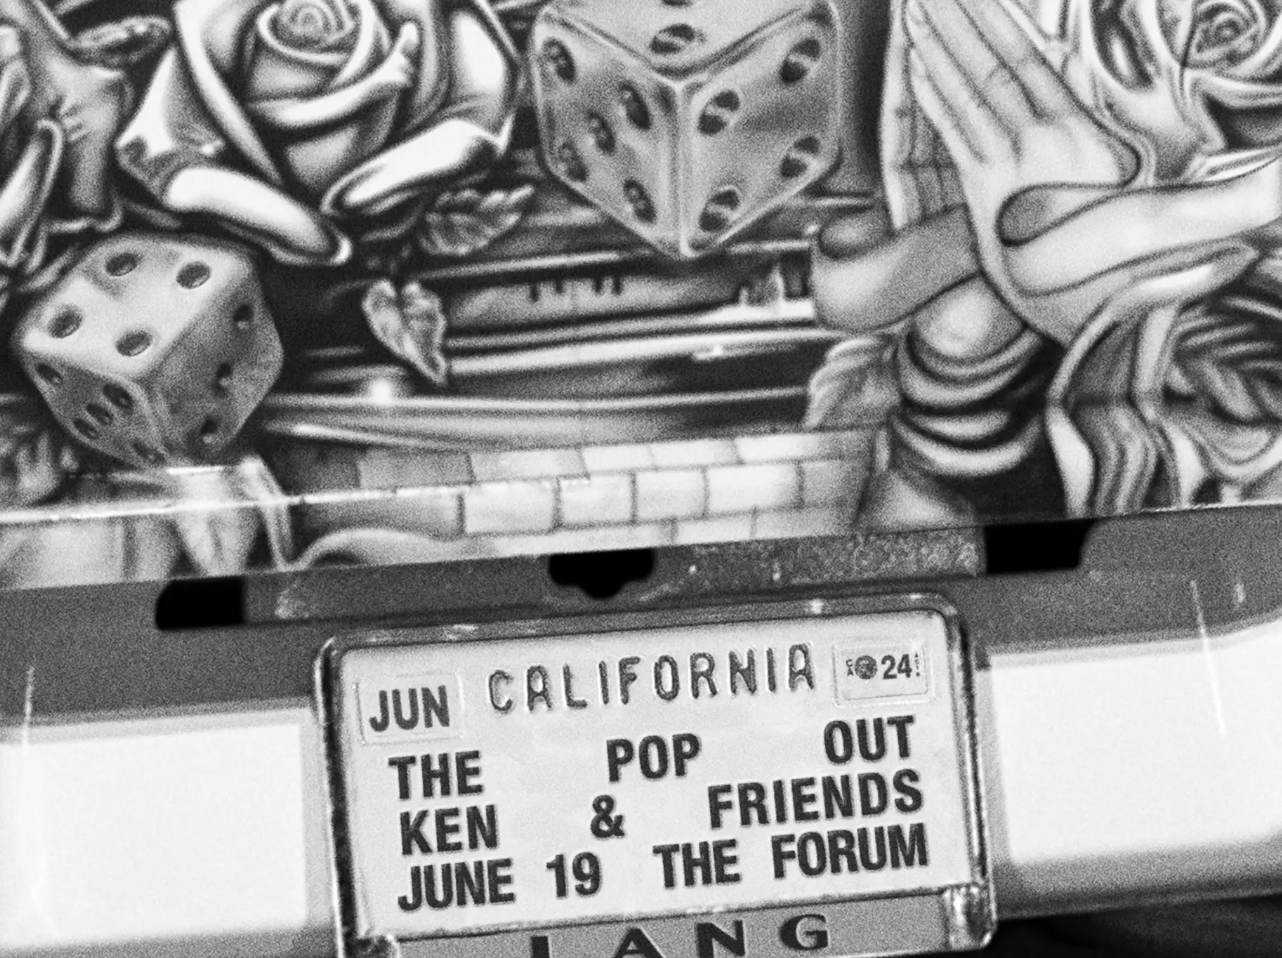 A decorative license plate on a car reads: &quot;THE POP OUT, KEN &amp; FRIENDS, JUNE 19, THE FORUM&quot;. Background has a mural with dice, roses, and praying hands